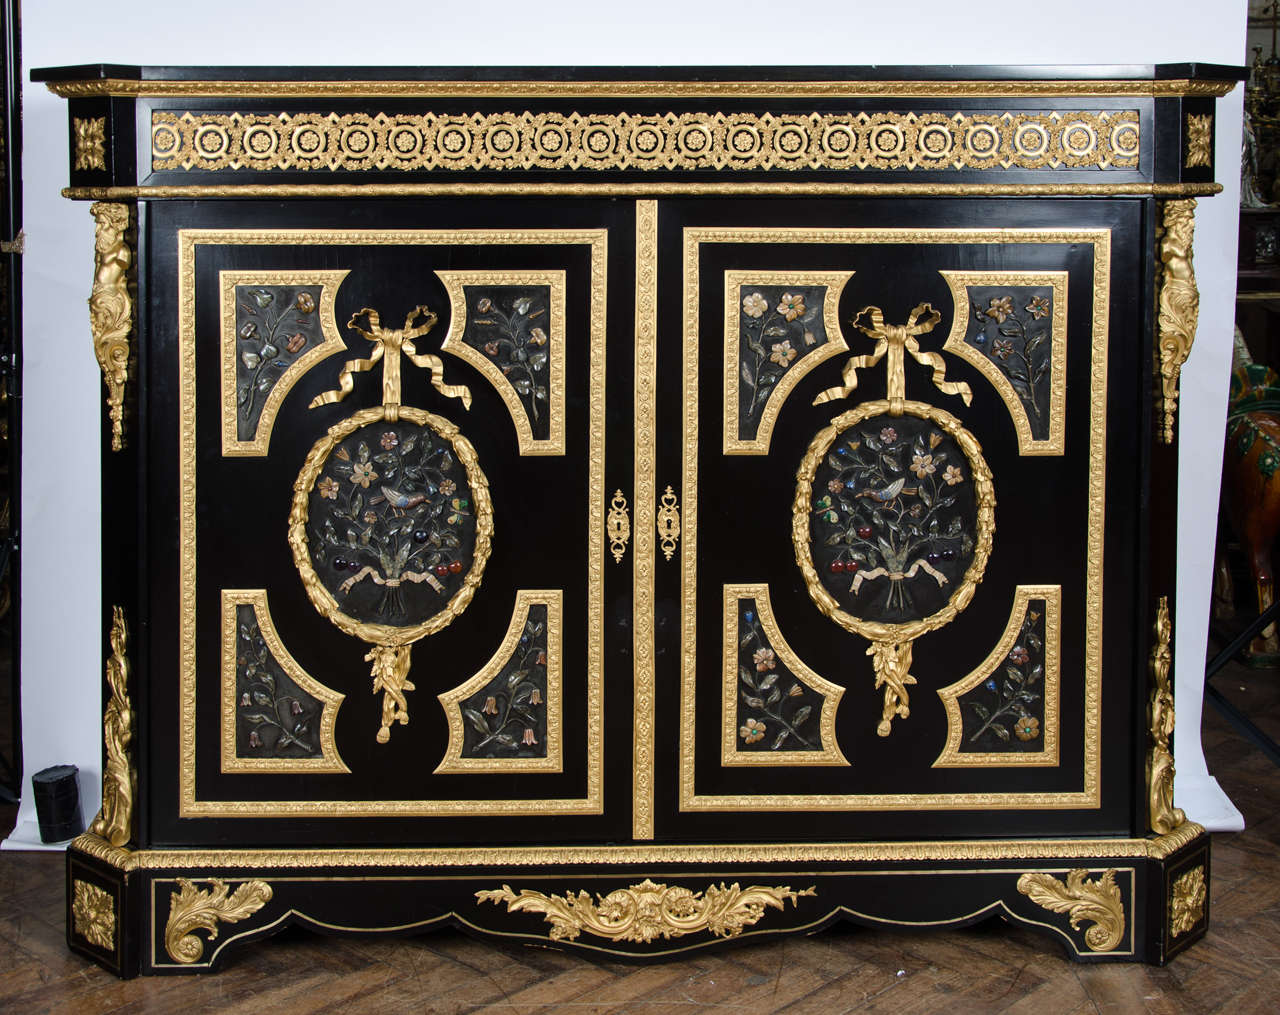 A very imposing and good quality French ebonized ormolu-mounted two-door cabinet having five panels of hard-stone relief depicting flowers and birds and raised on ormolu-mounted bracket feet.